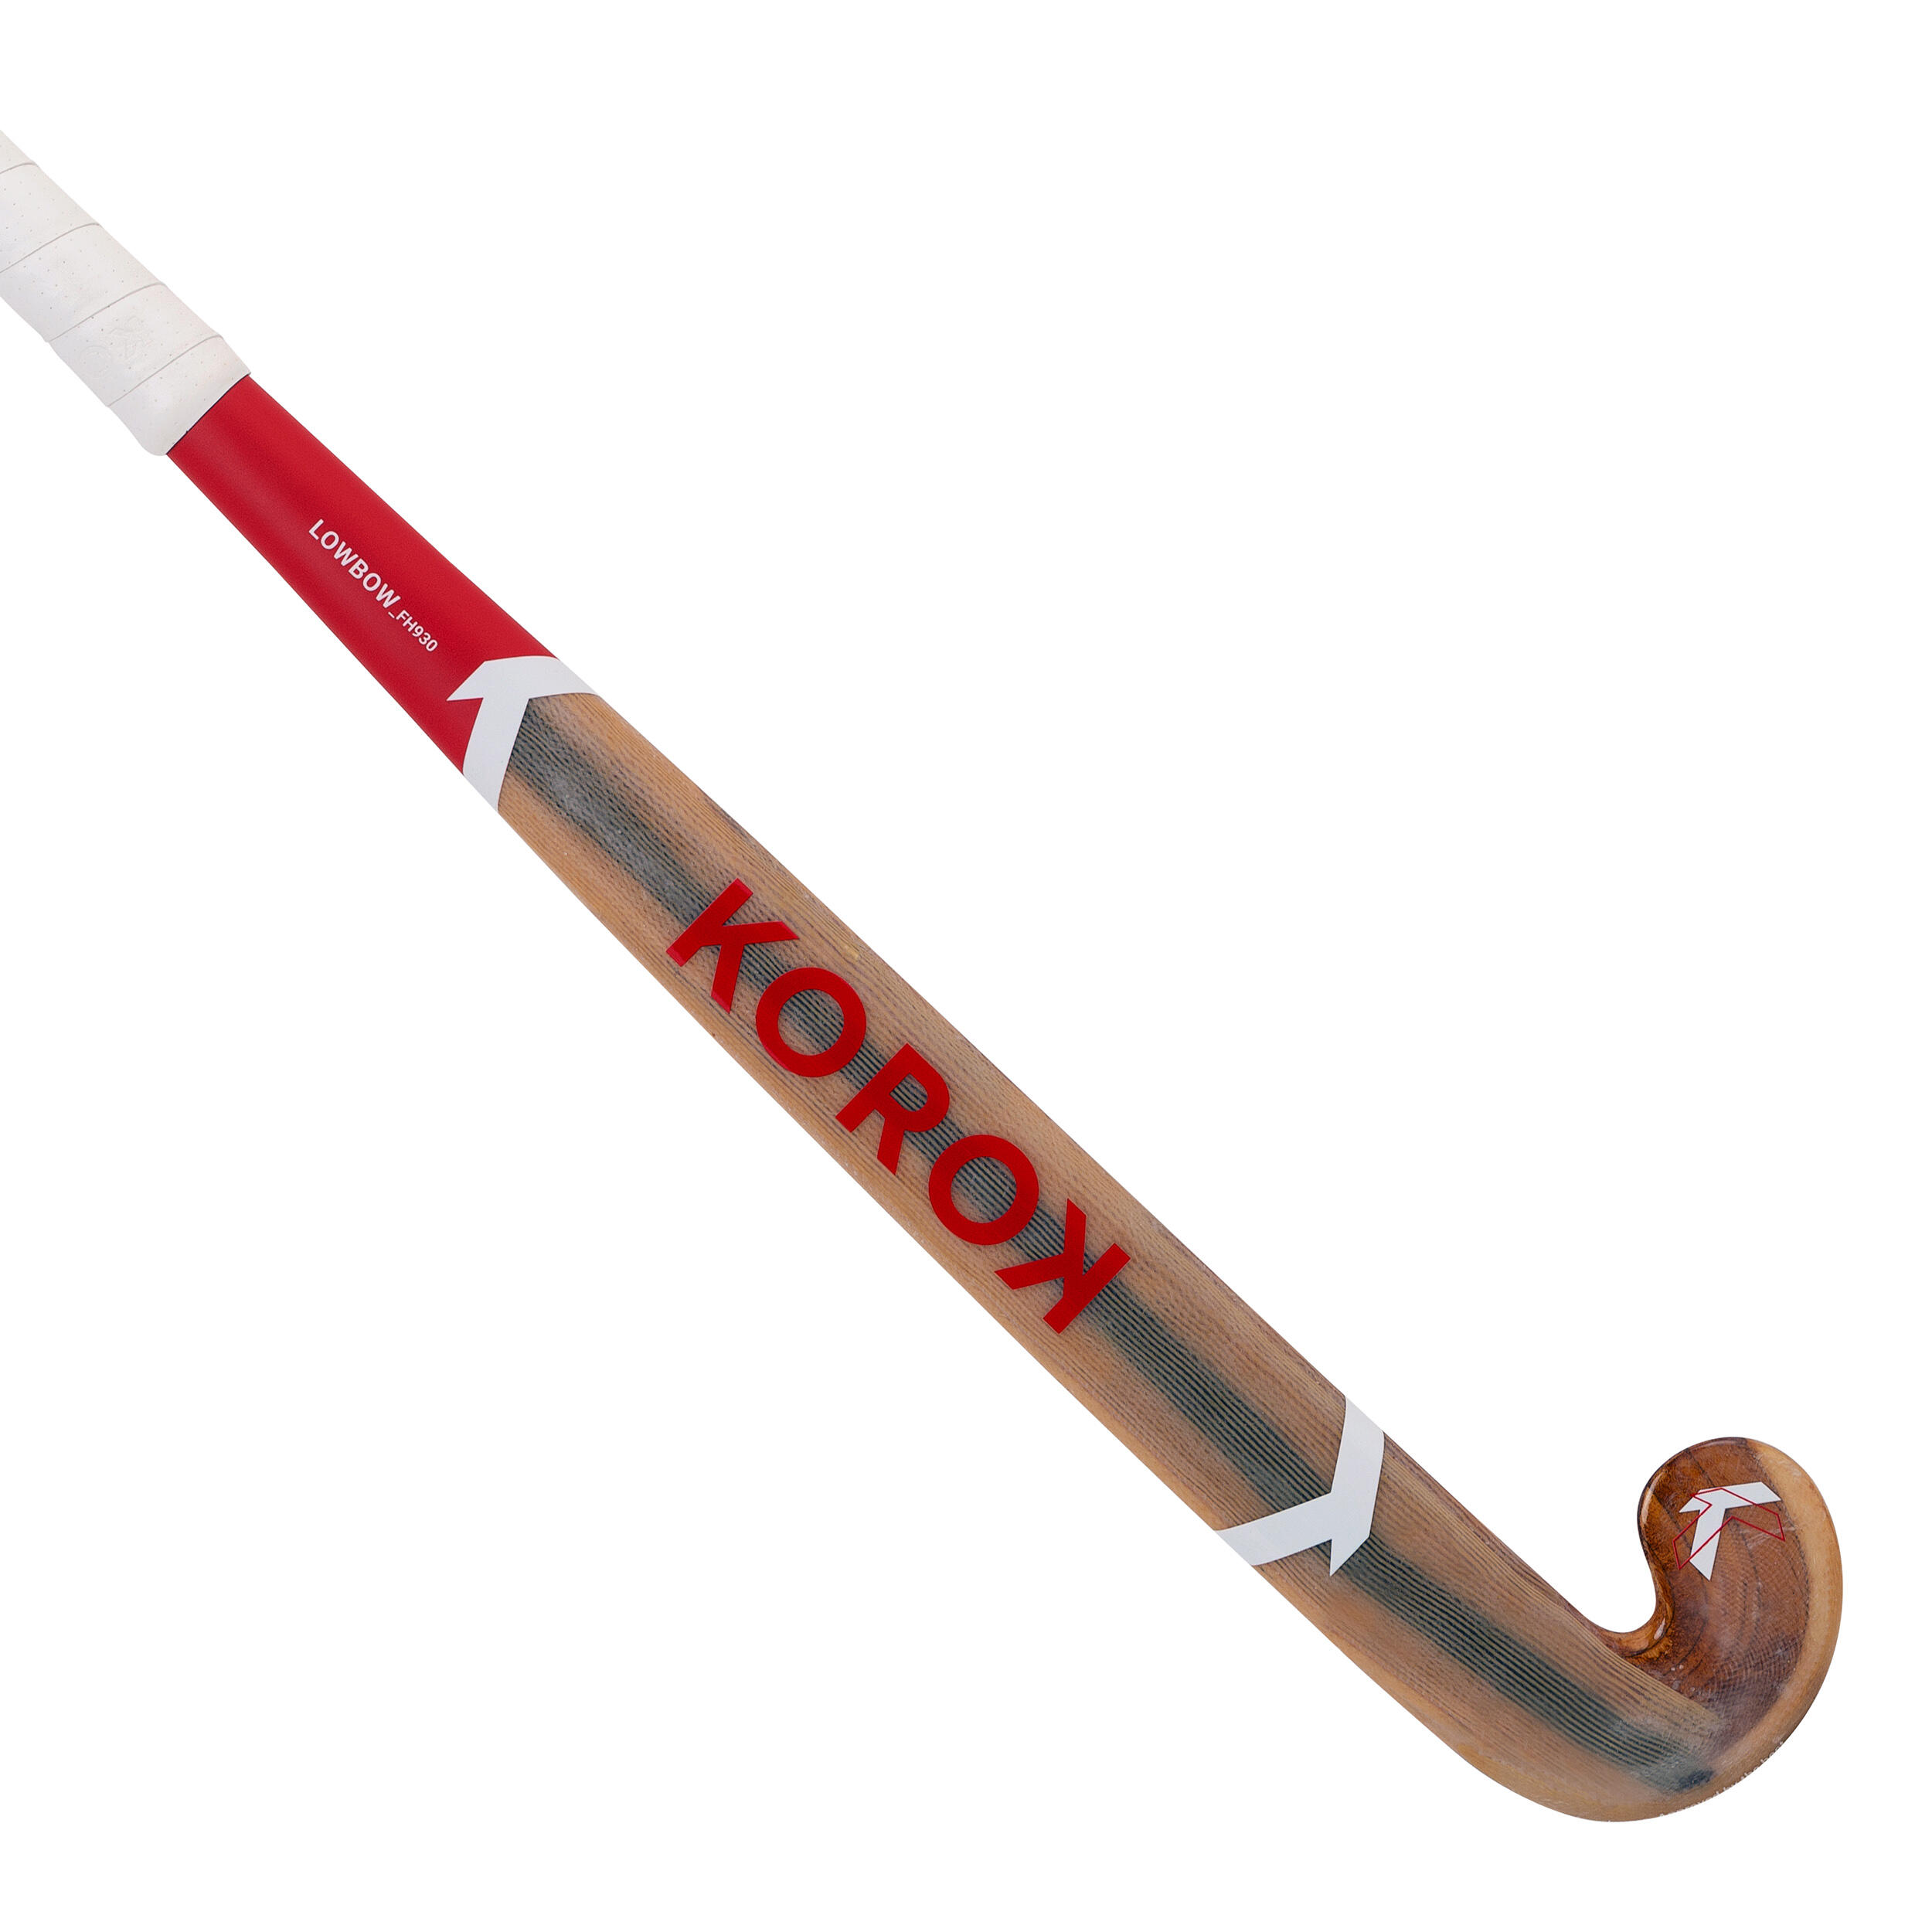 Adult Advanced Wood and 30% Carbon Low Bow Indoor Hockey Stick FH930W - Wood/Red 1/8